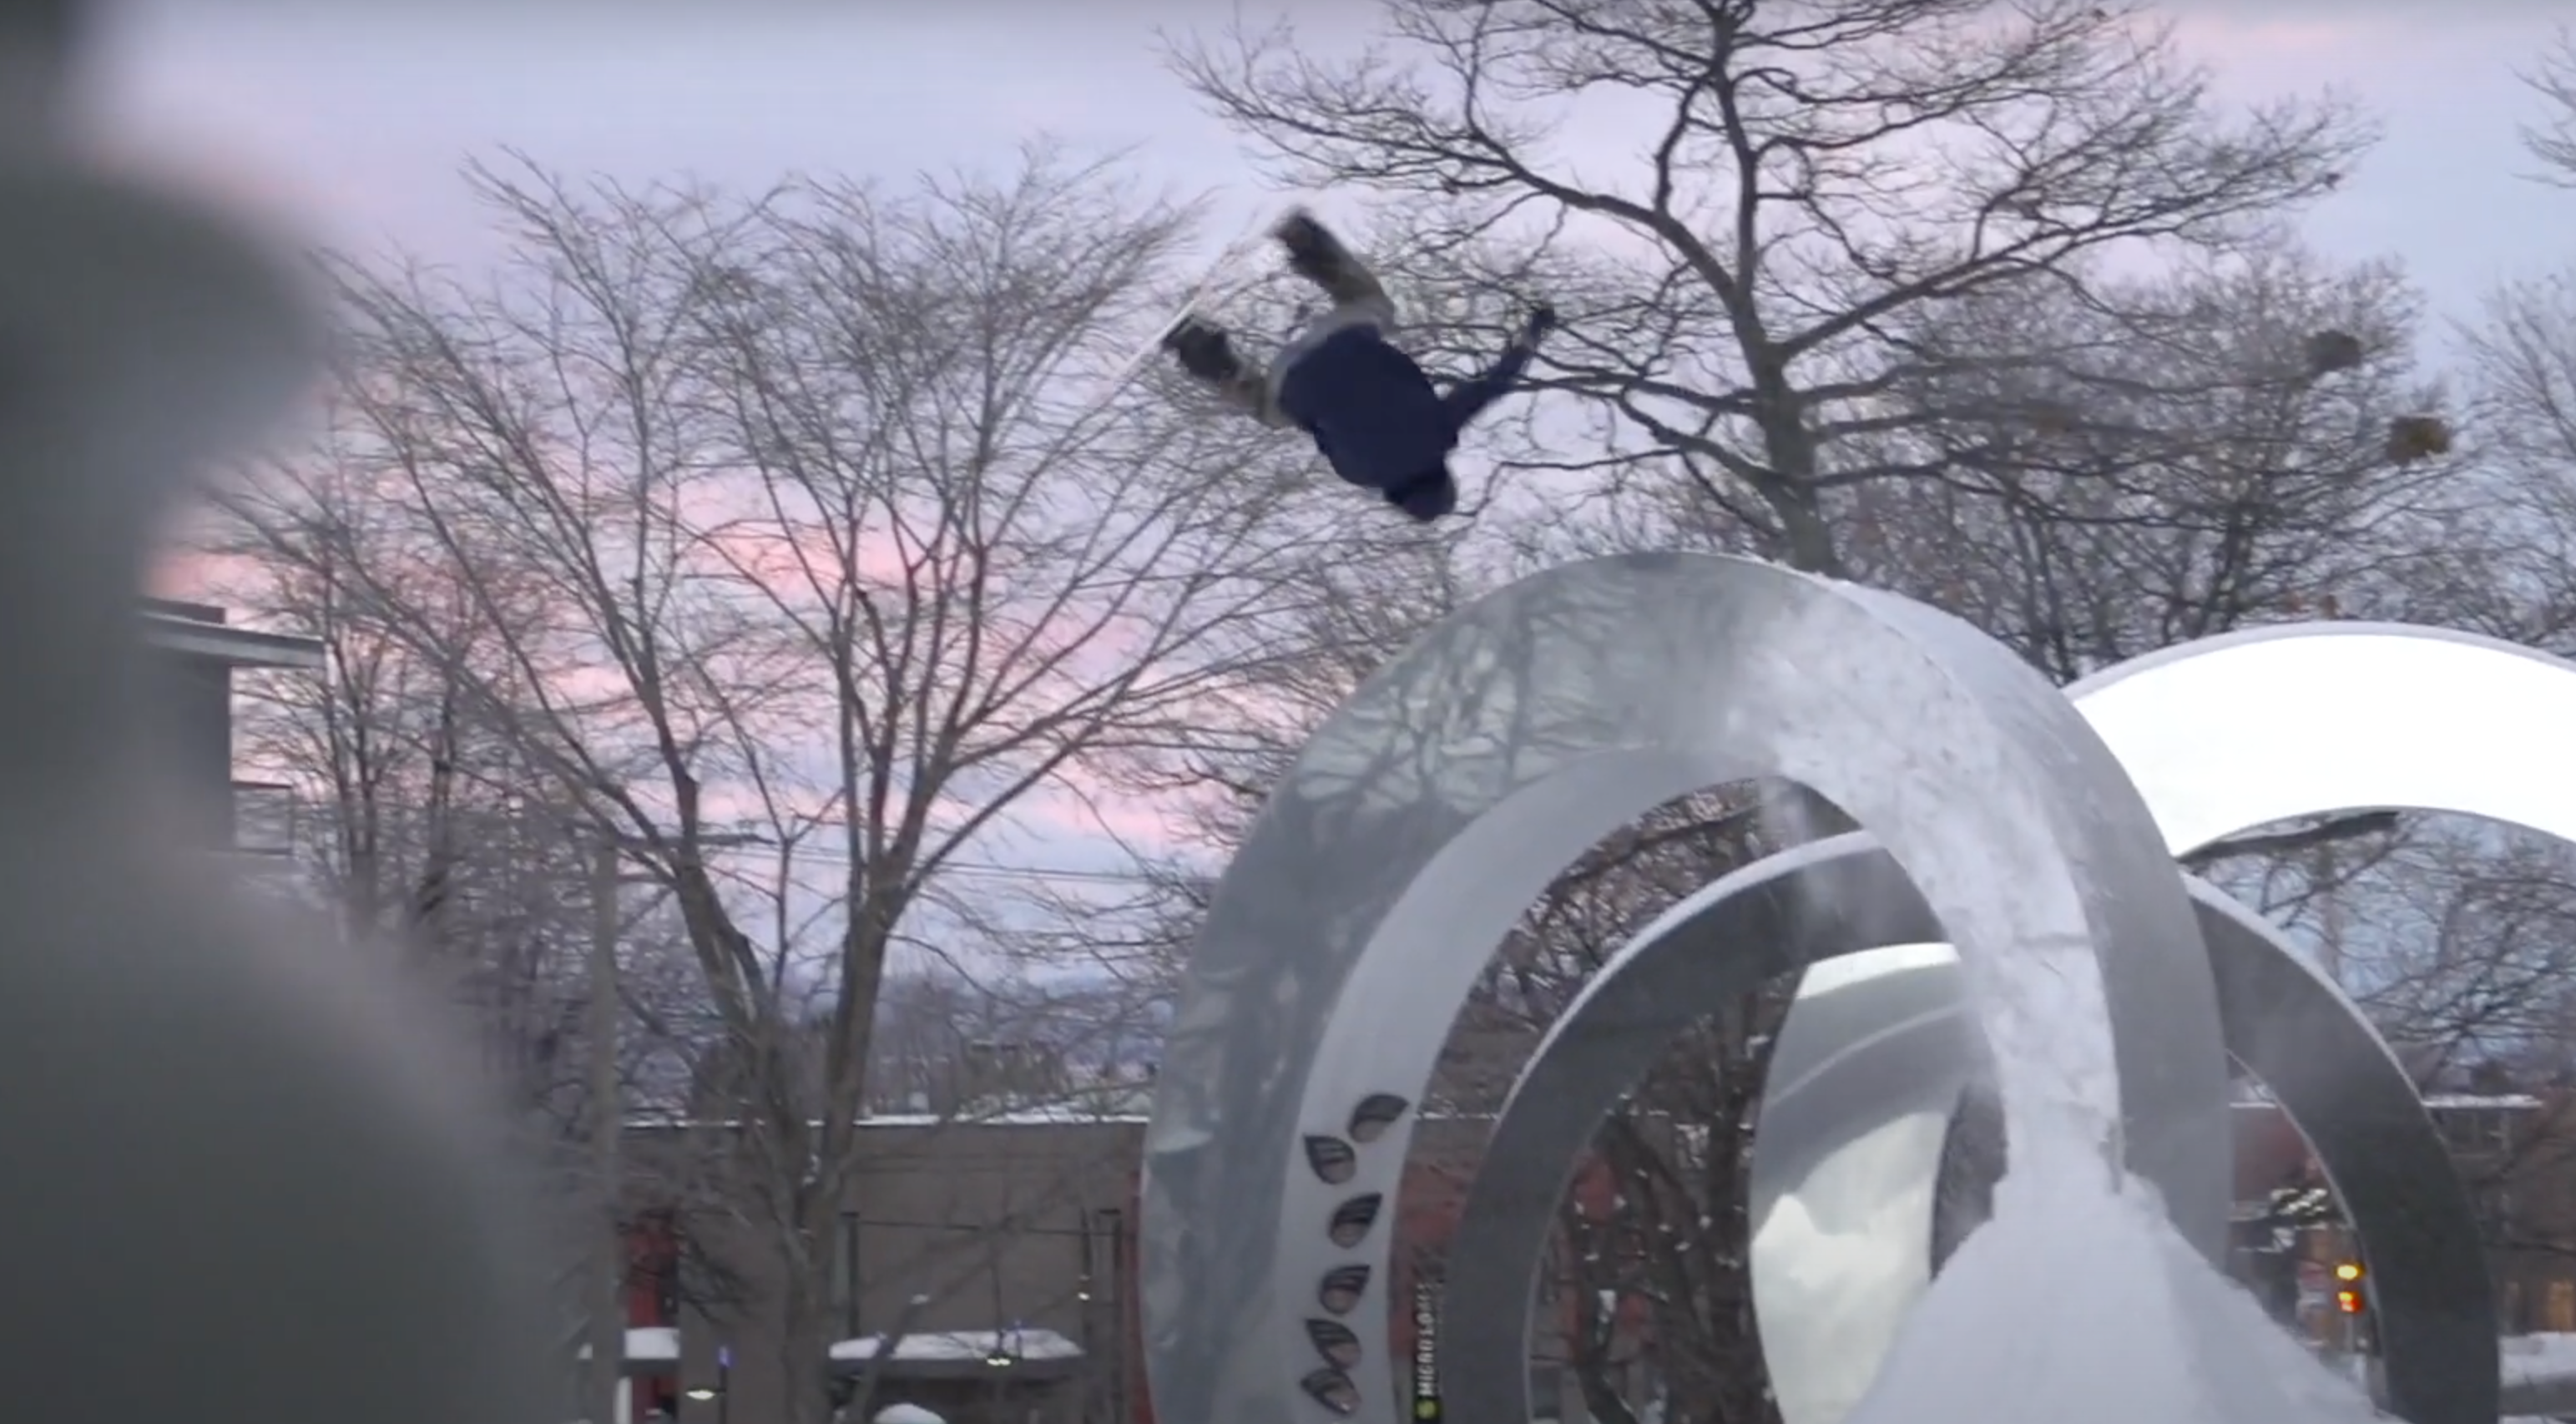 CBDayz Raw Files | Frontside Cork At The Art Sculpture | Episode 5 of 10